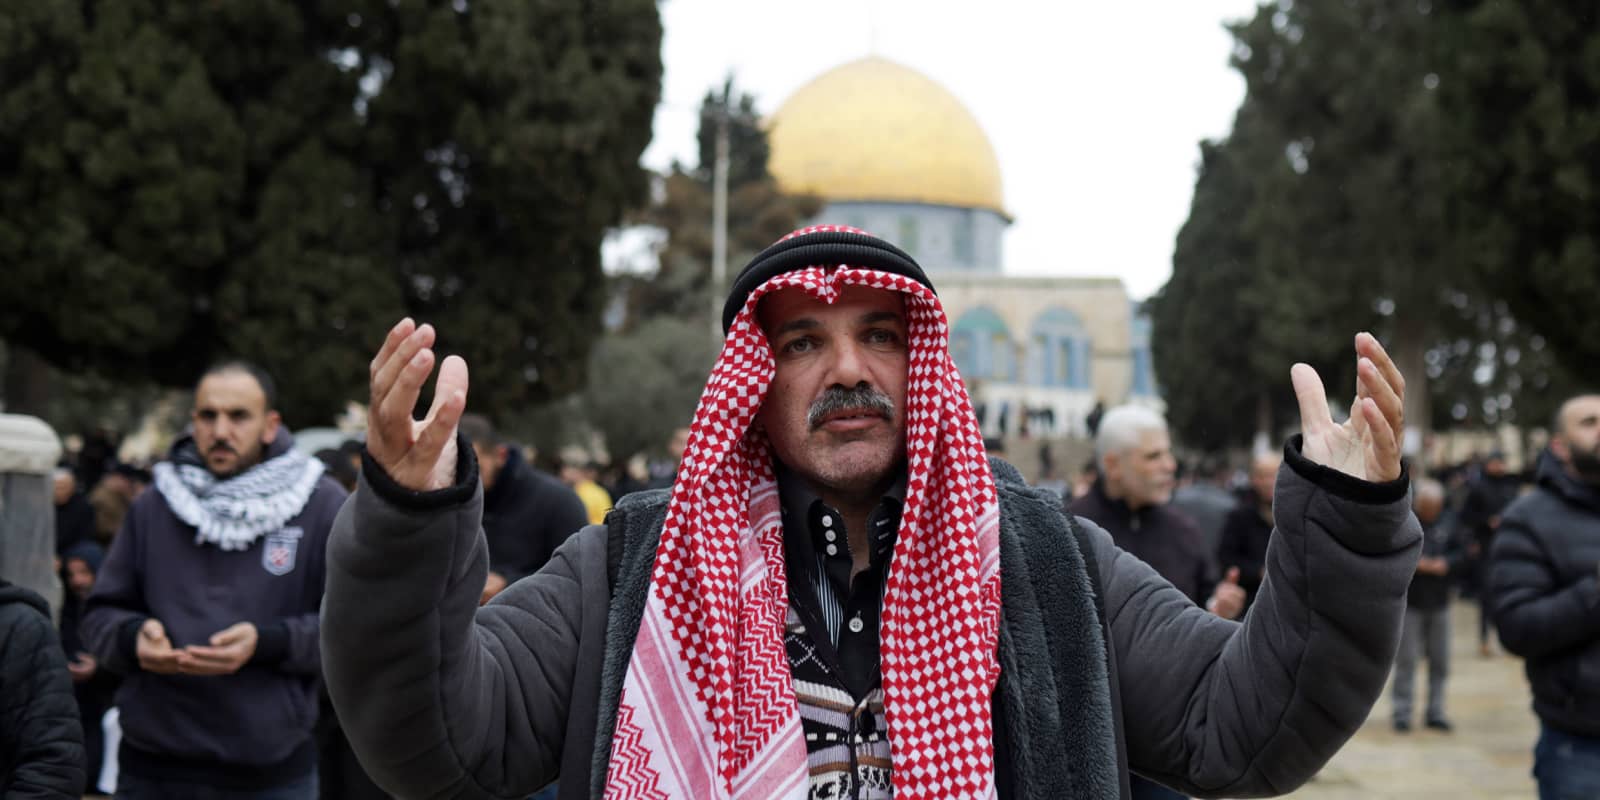 Palestinians gather in the Al-Aqsa mosque compound for the Friday noon prayer in Jerusalem